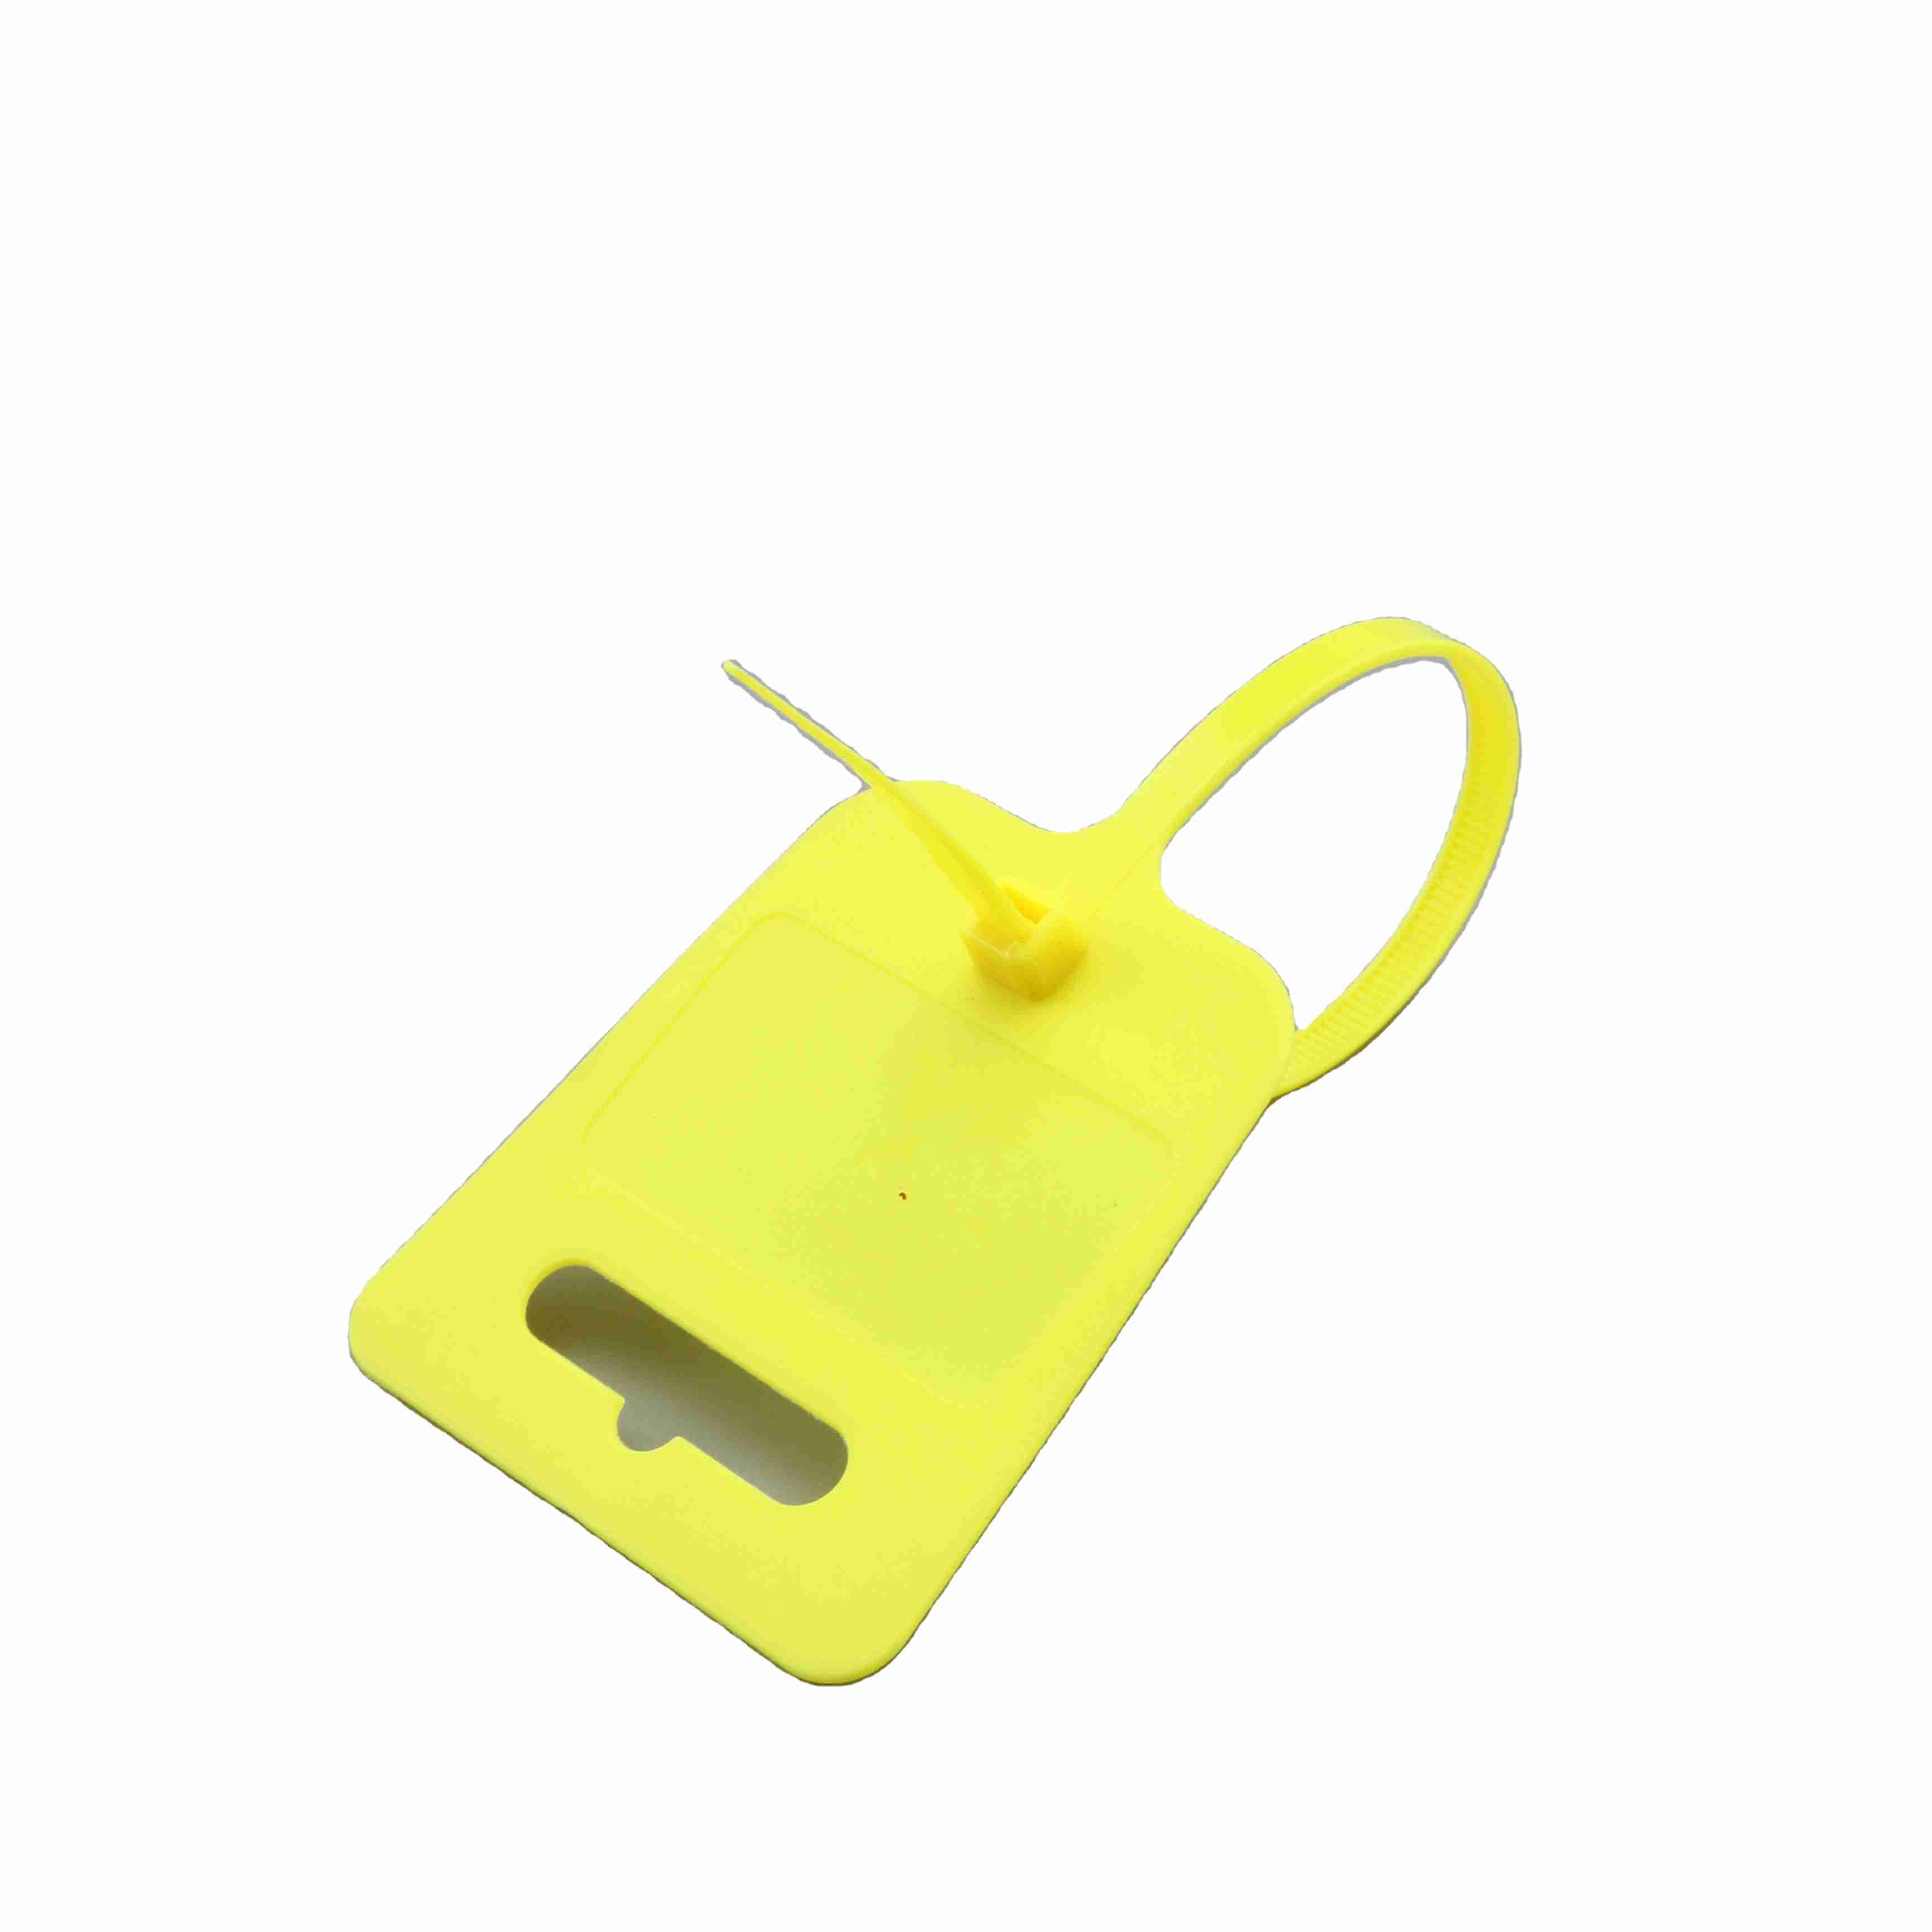 Label cable tie - 3 